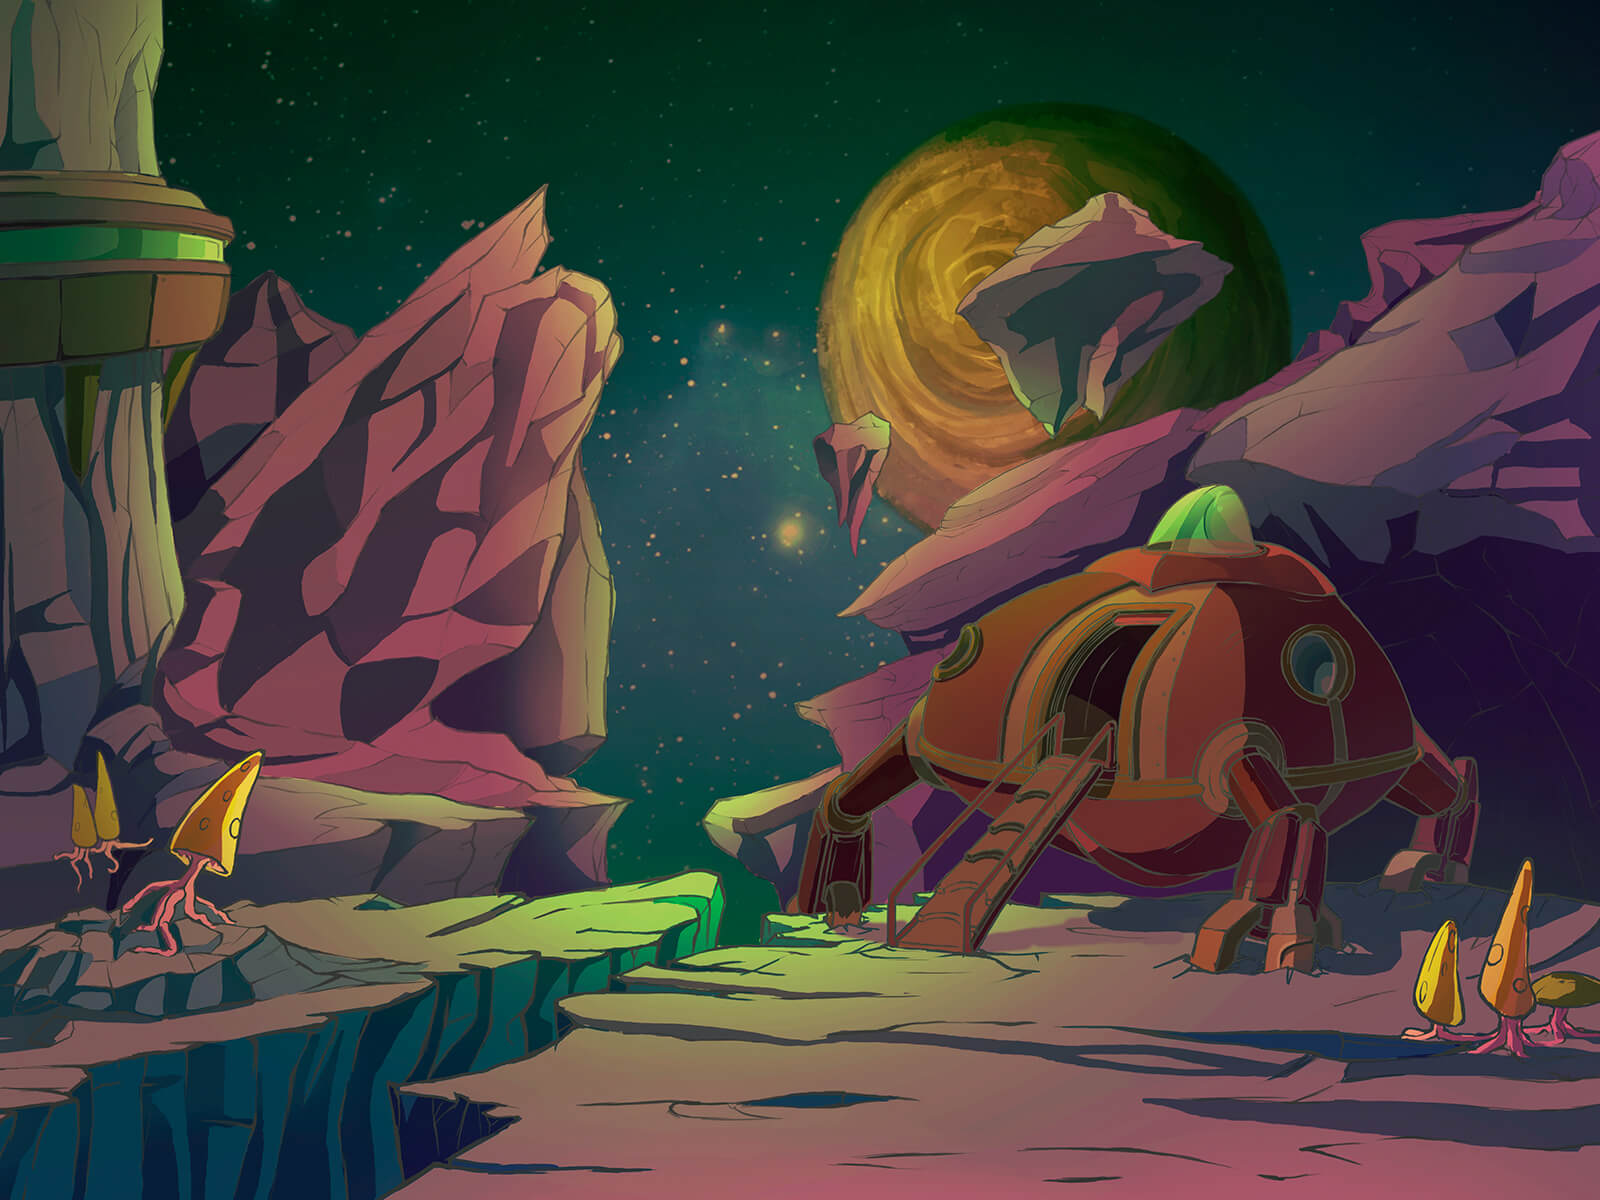 Rocky alien world with strange fungi and trees dotting the landscape. A red landing vehicle has lowered a ramp nearby.